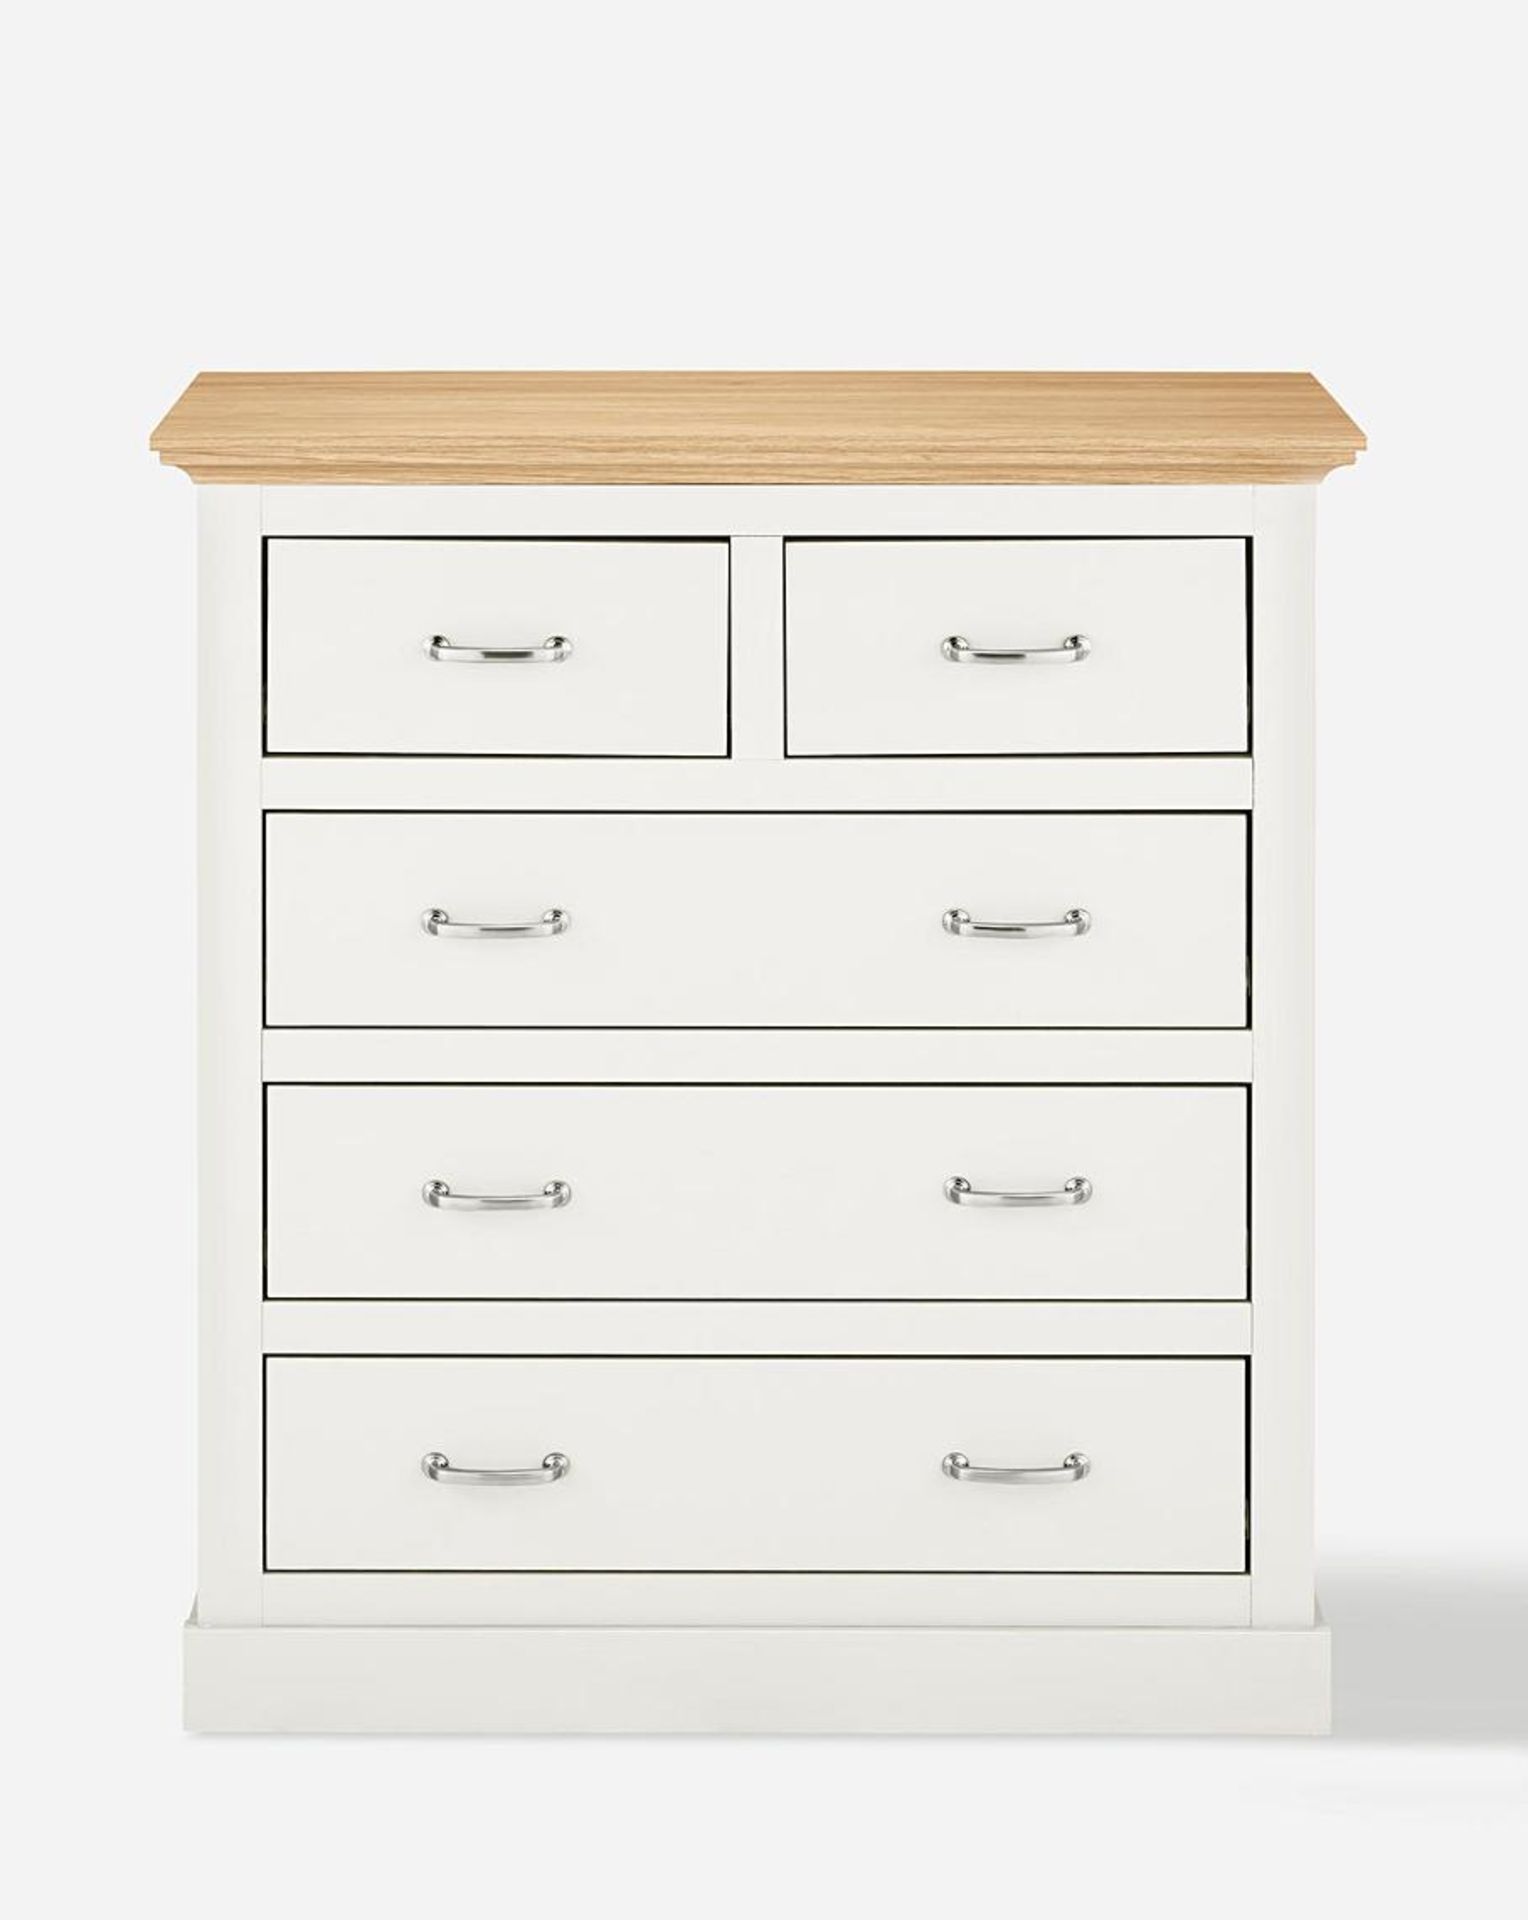 Ashford 3+2 Drawer Chest. RRP £399.00. - SR6 Bring an elegant country-style charm into your